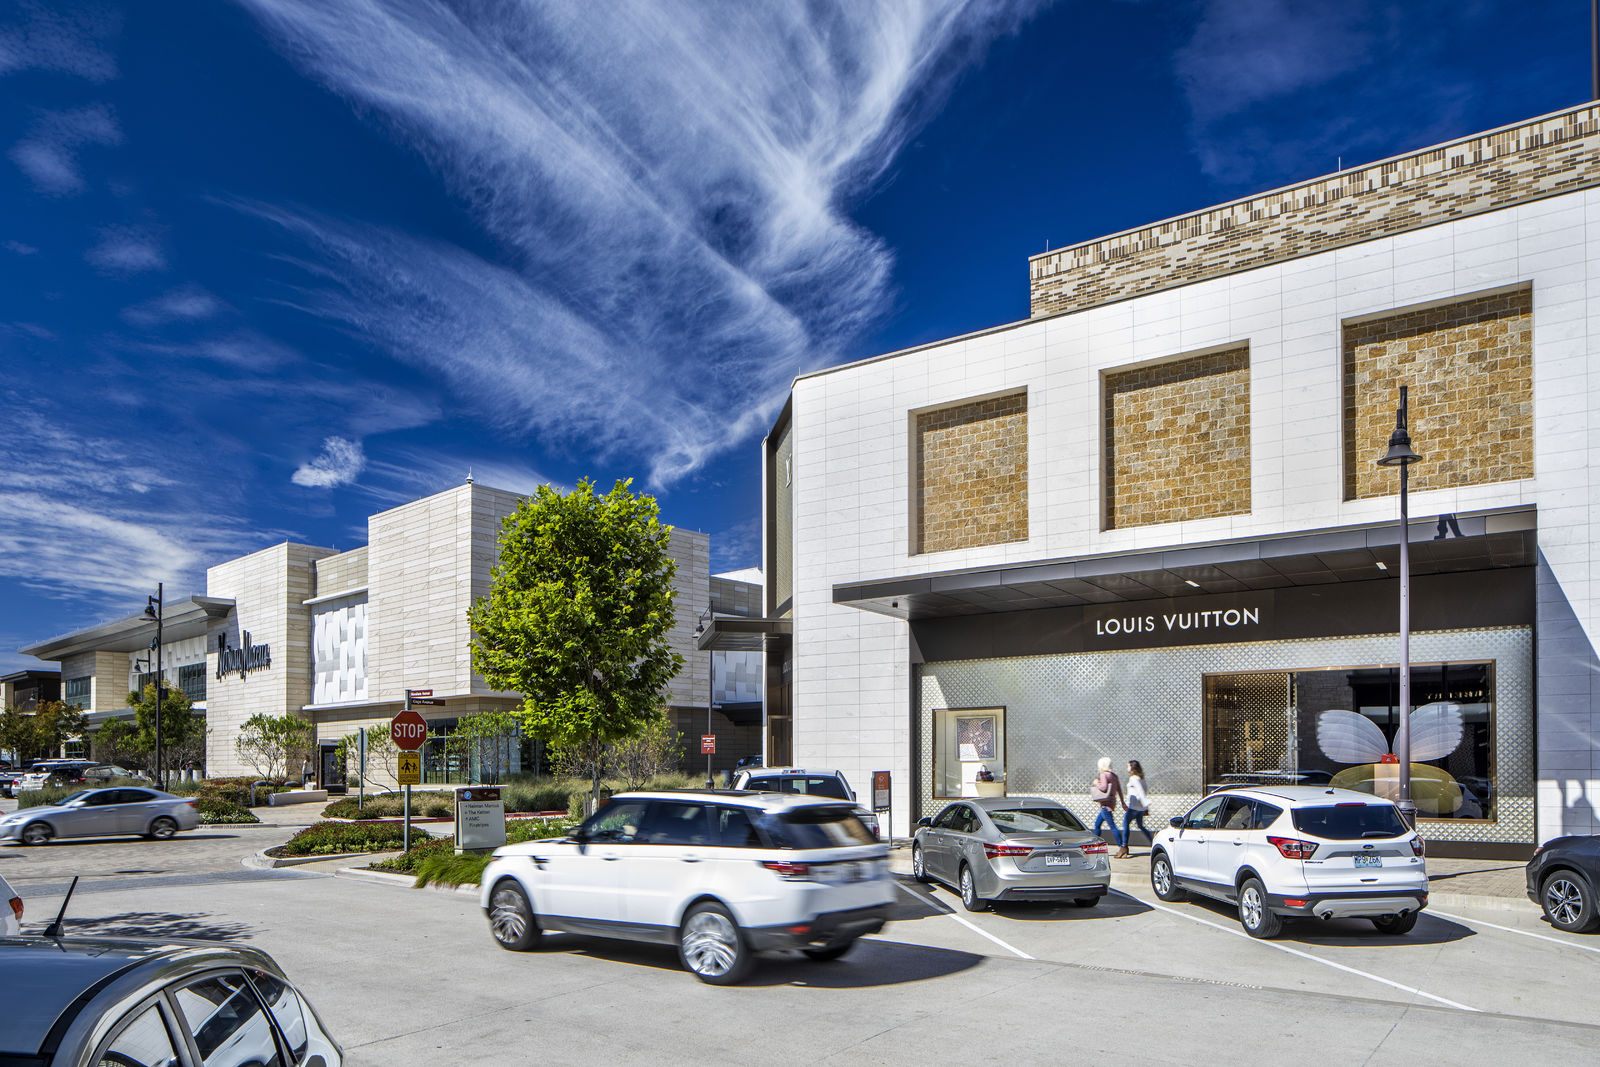 The Shops at Clearfork - The Beck Group